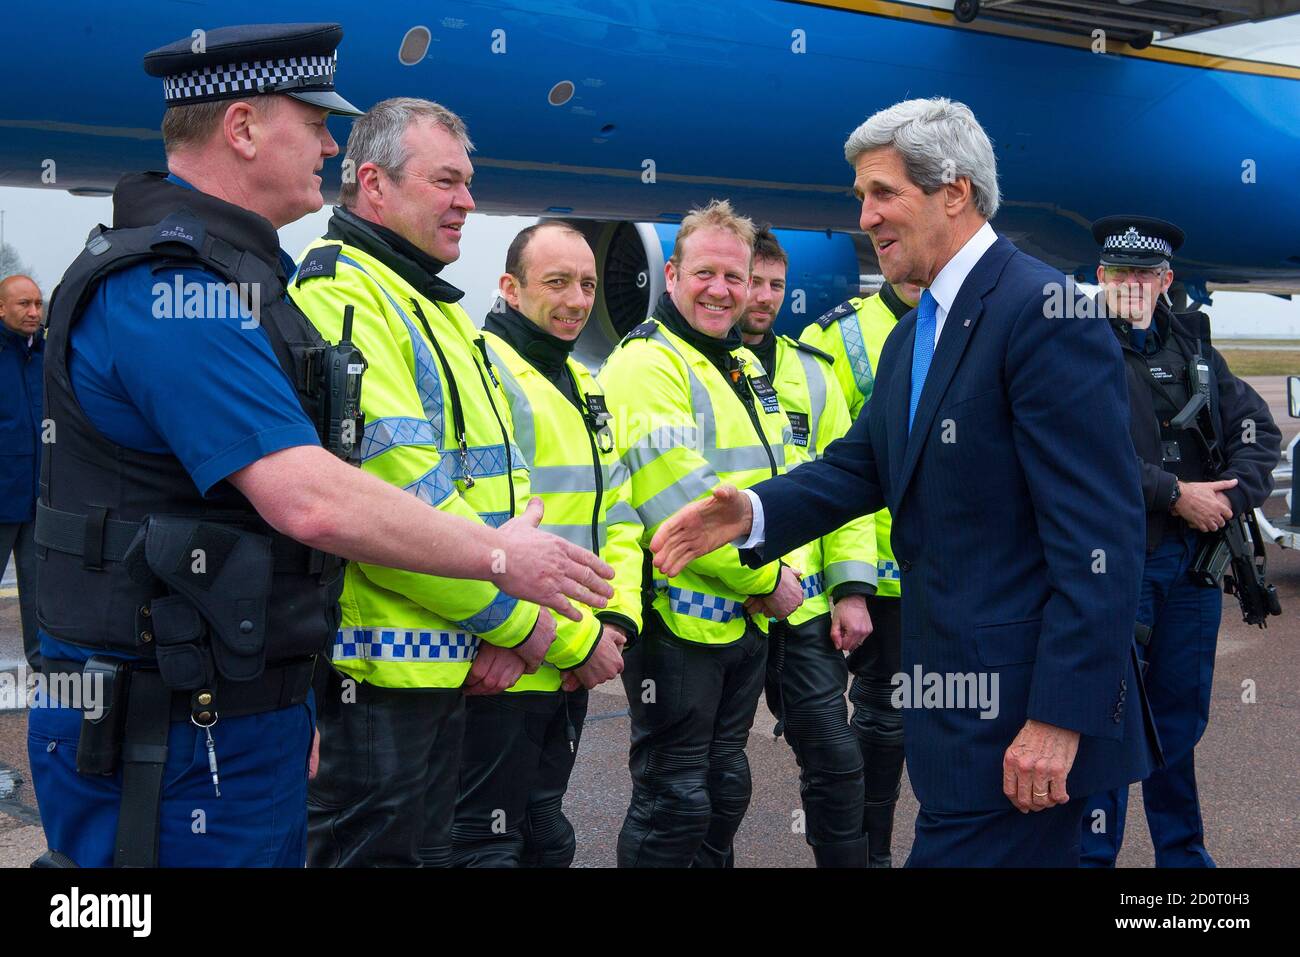 US Secretary of State John Kerry thanks London Metropolitian Police Officers for their help as he prepares to depart London at Stansted Airport near London April 11, 2013.       REUTERS/Paul J. Richards/Pool   (BRITAIN - - Tags: POLITICS) Stock Photo